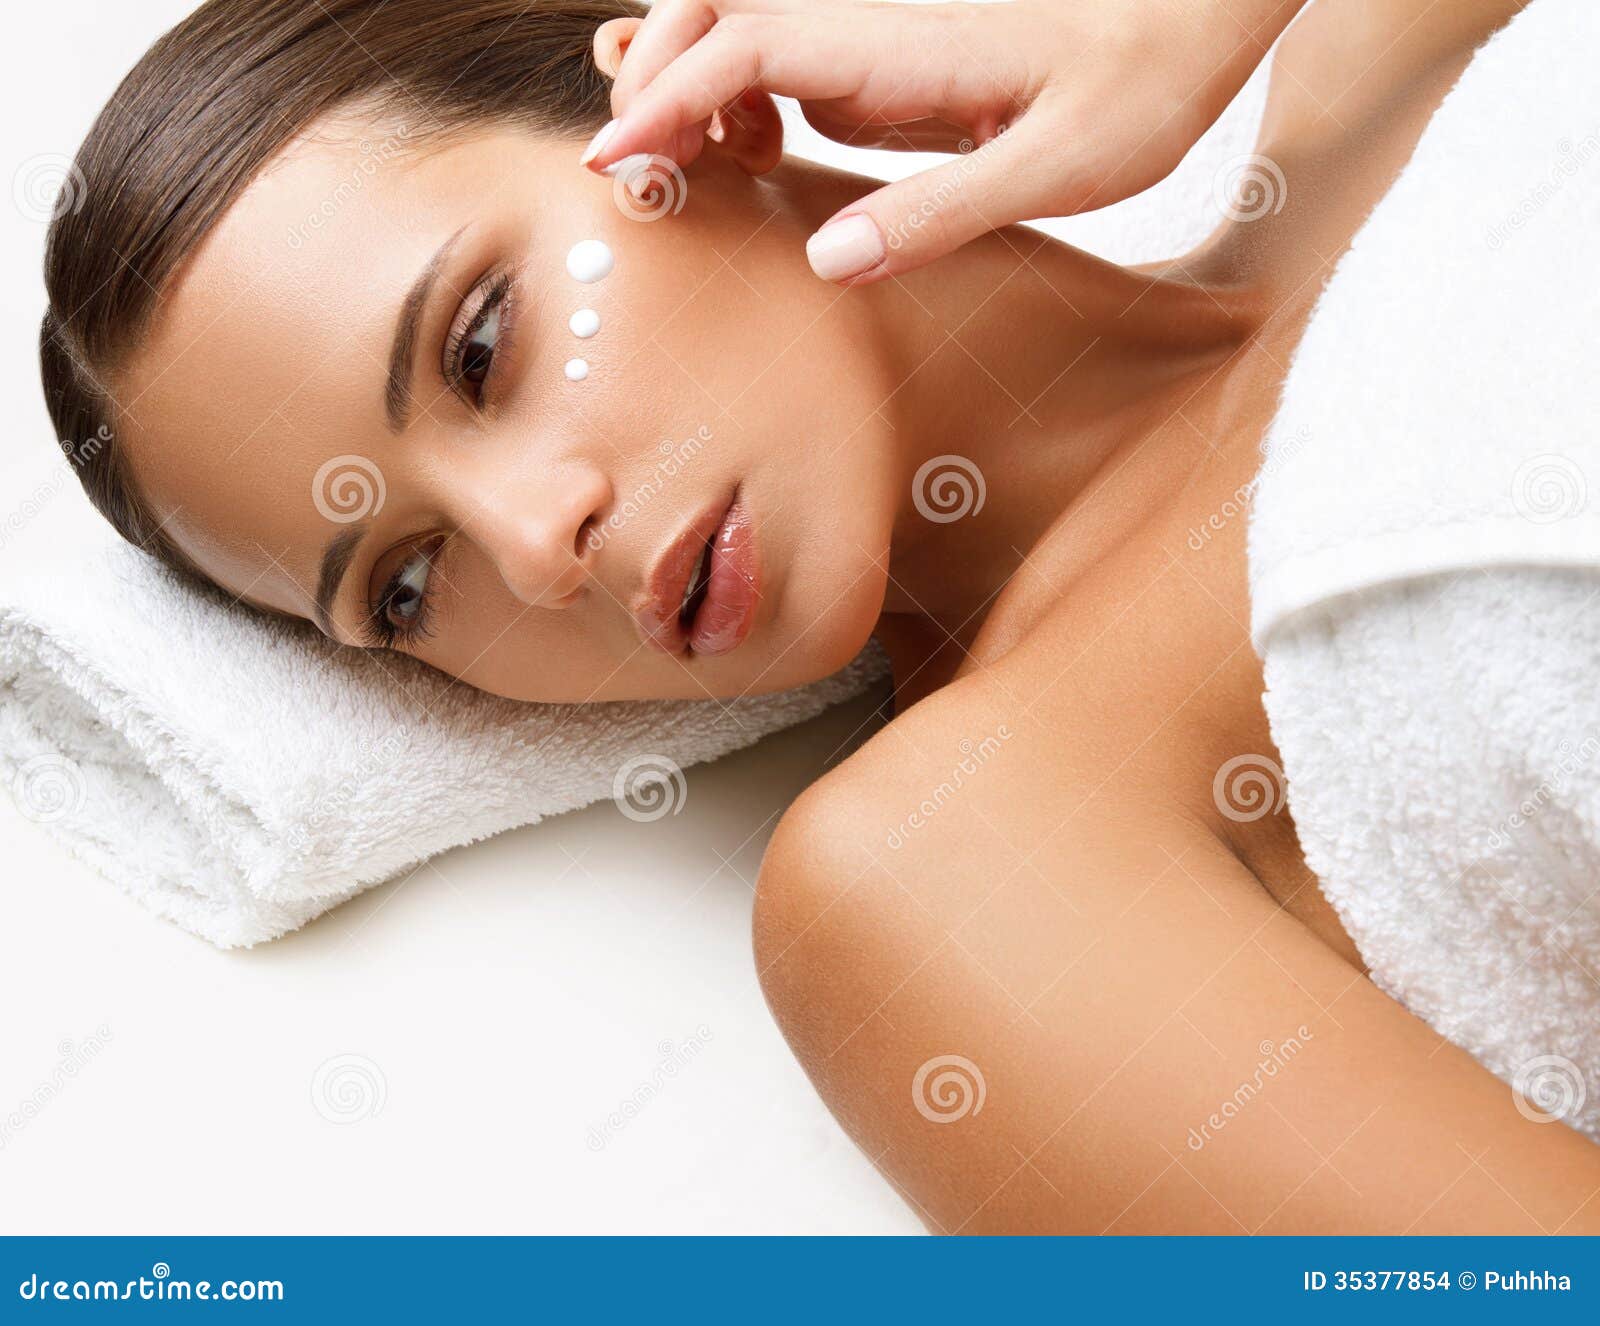 Beautiful woman getting spa treatment. cosmetic cream on a cheek stock images - image: 35377854.